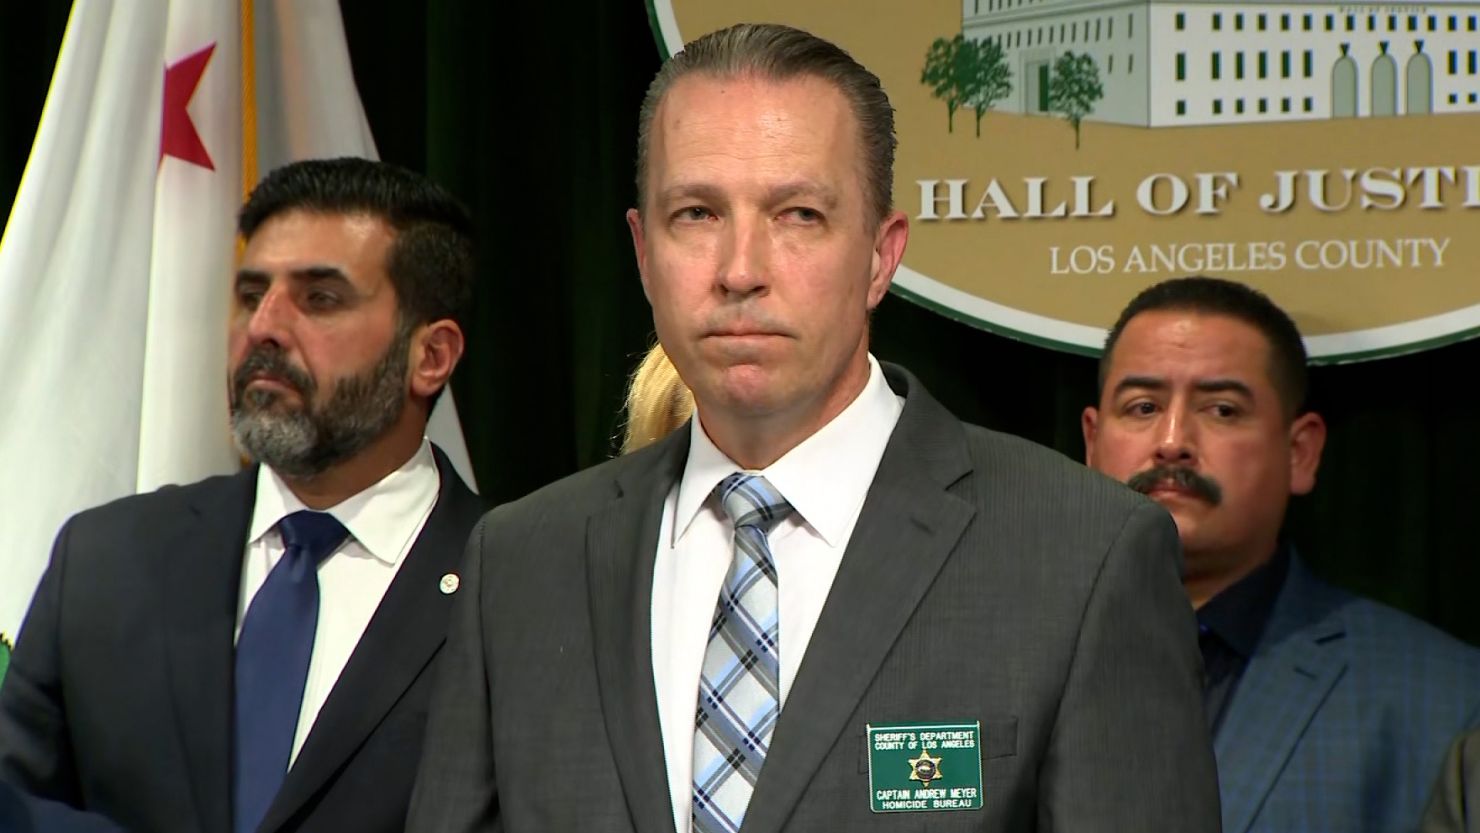 Los Angeles County Sheriff’s Department Capt. Andrew Meyer speaks at a news conference Tuesday.